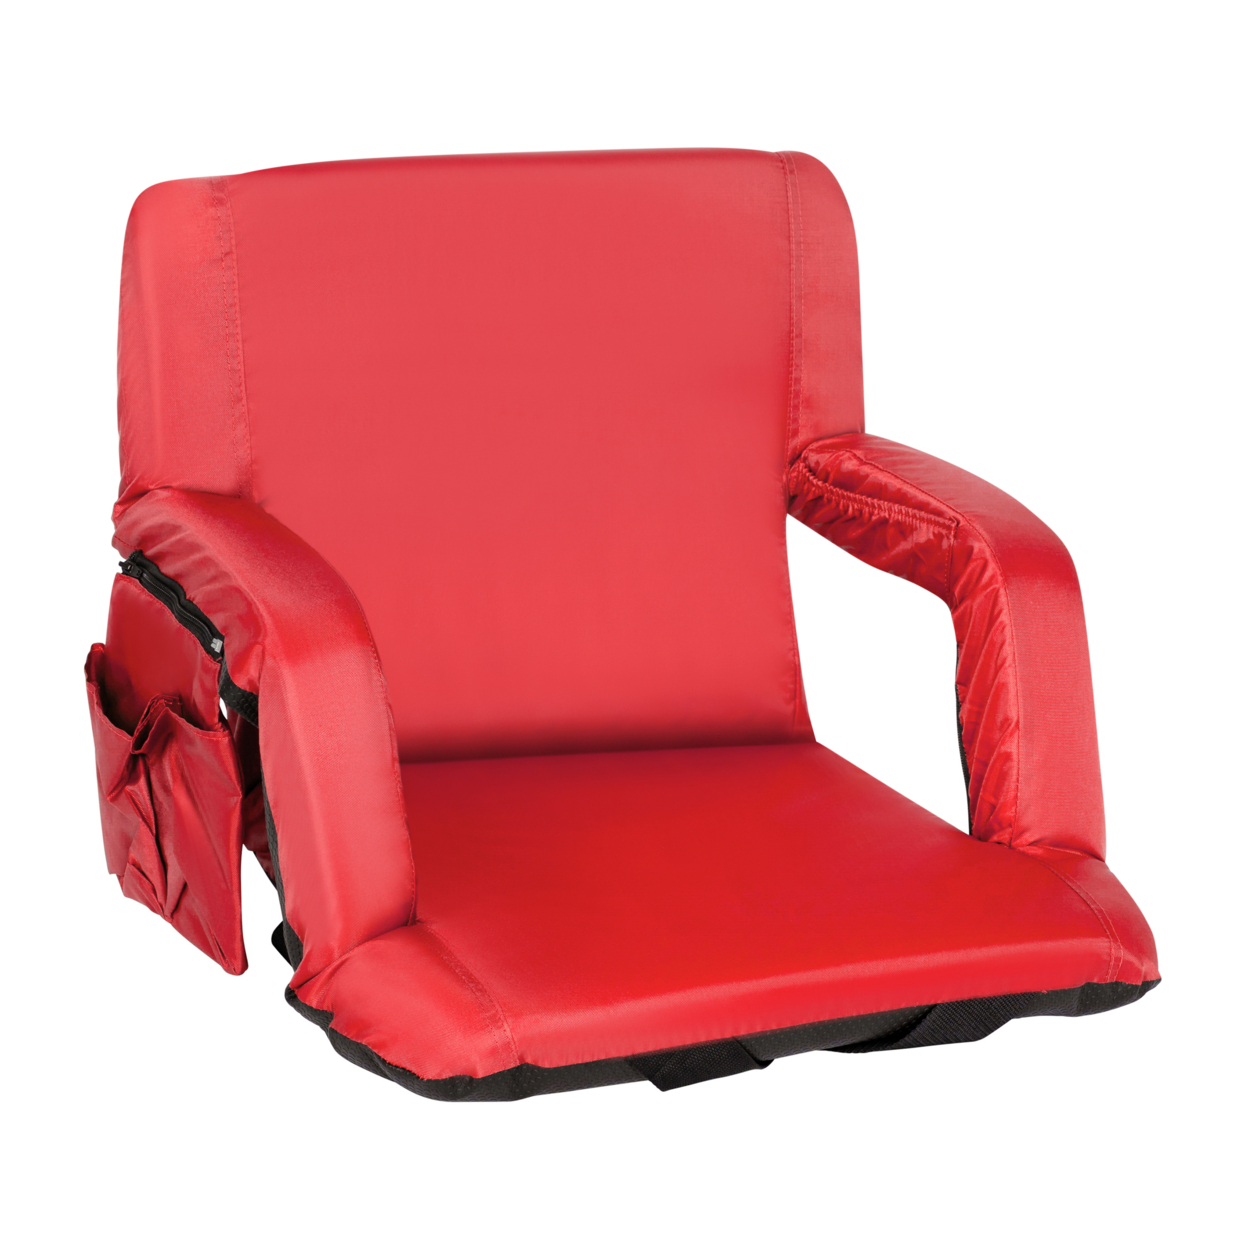 Red Portable Lightweight Reclining Stadium Chair With Armrests, Padded Back & Seat With Dual Storage Pockets And Backpack Straps